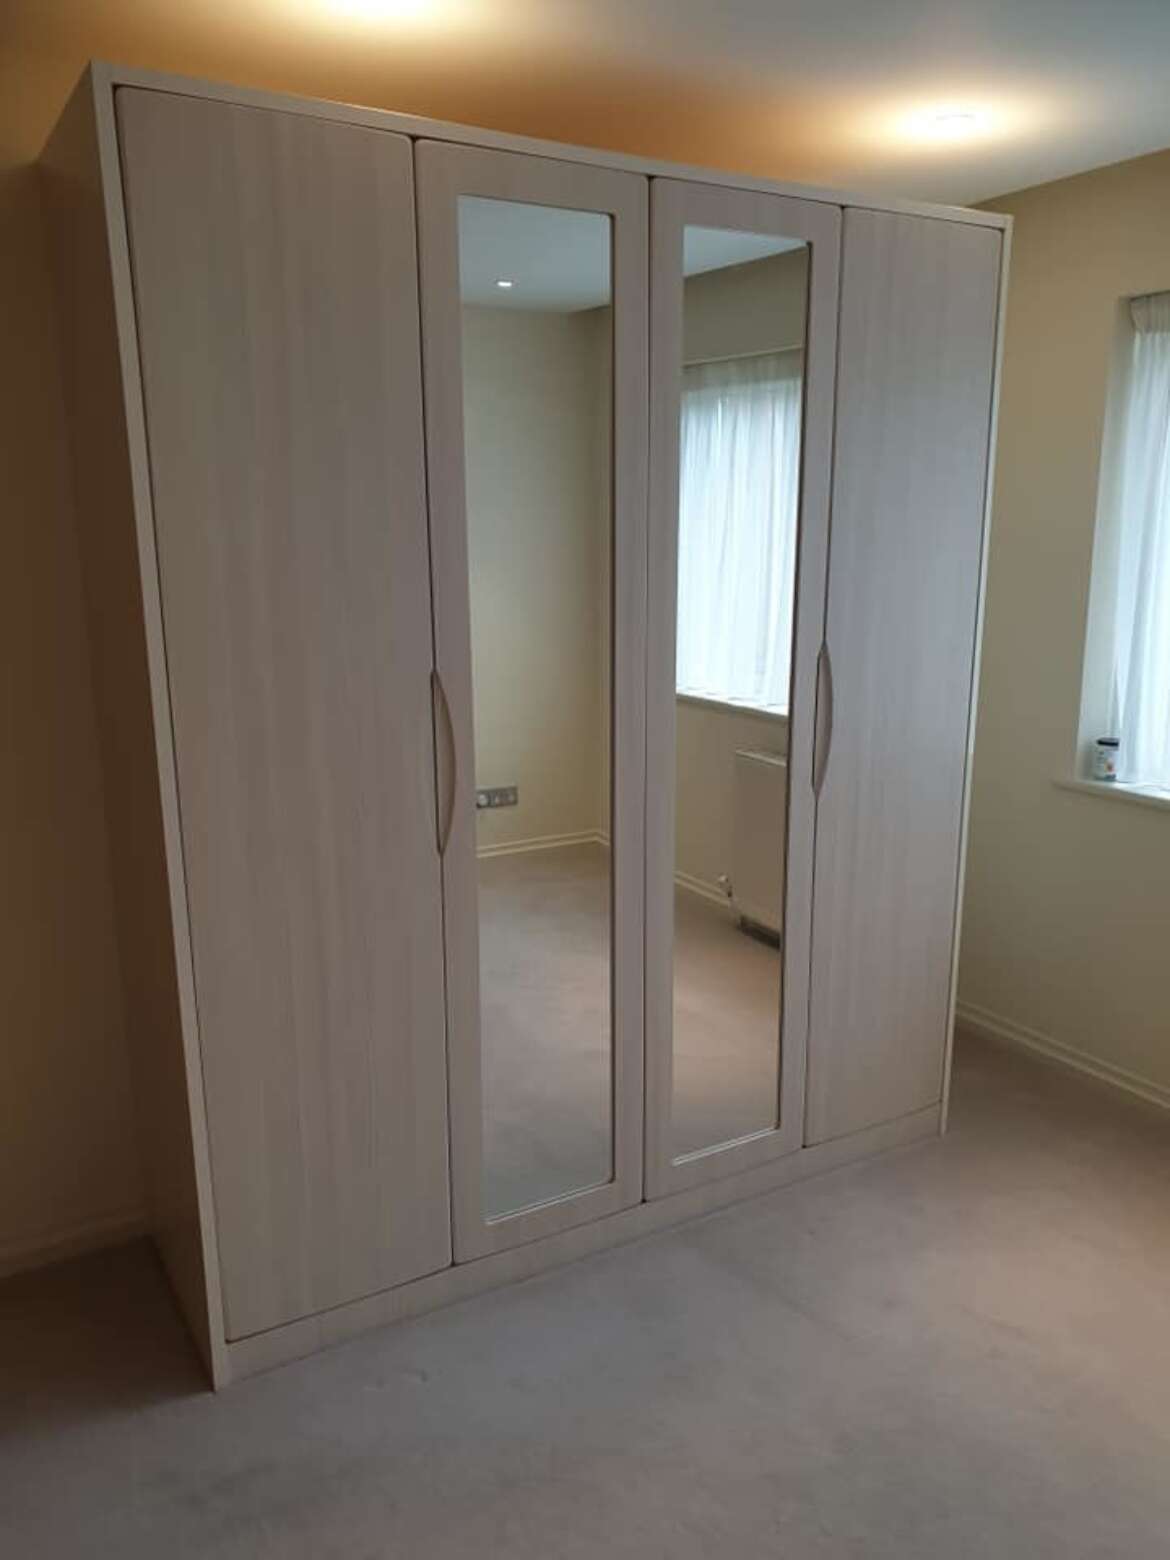 Fitted Bespoke Hinged Wardrobe Photo Gallery